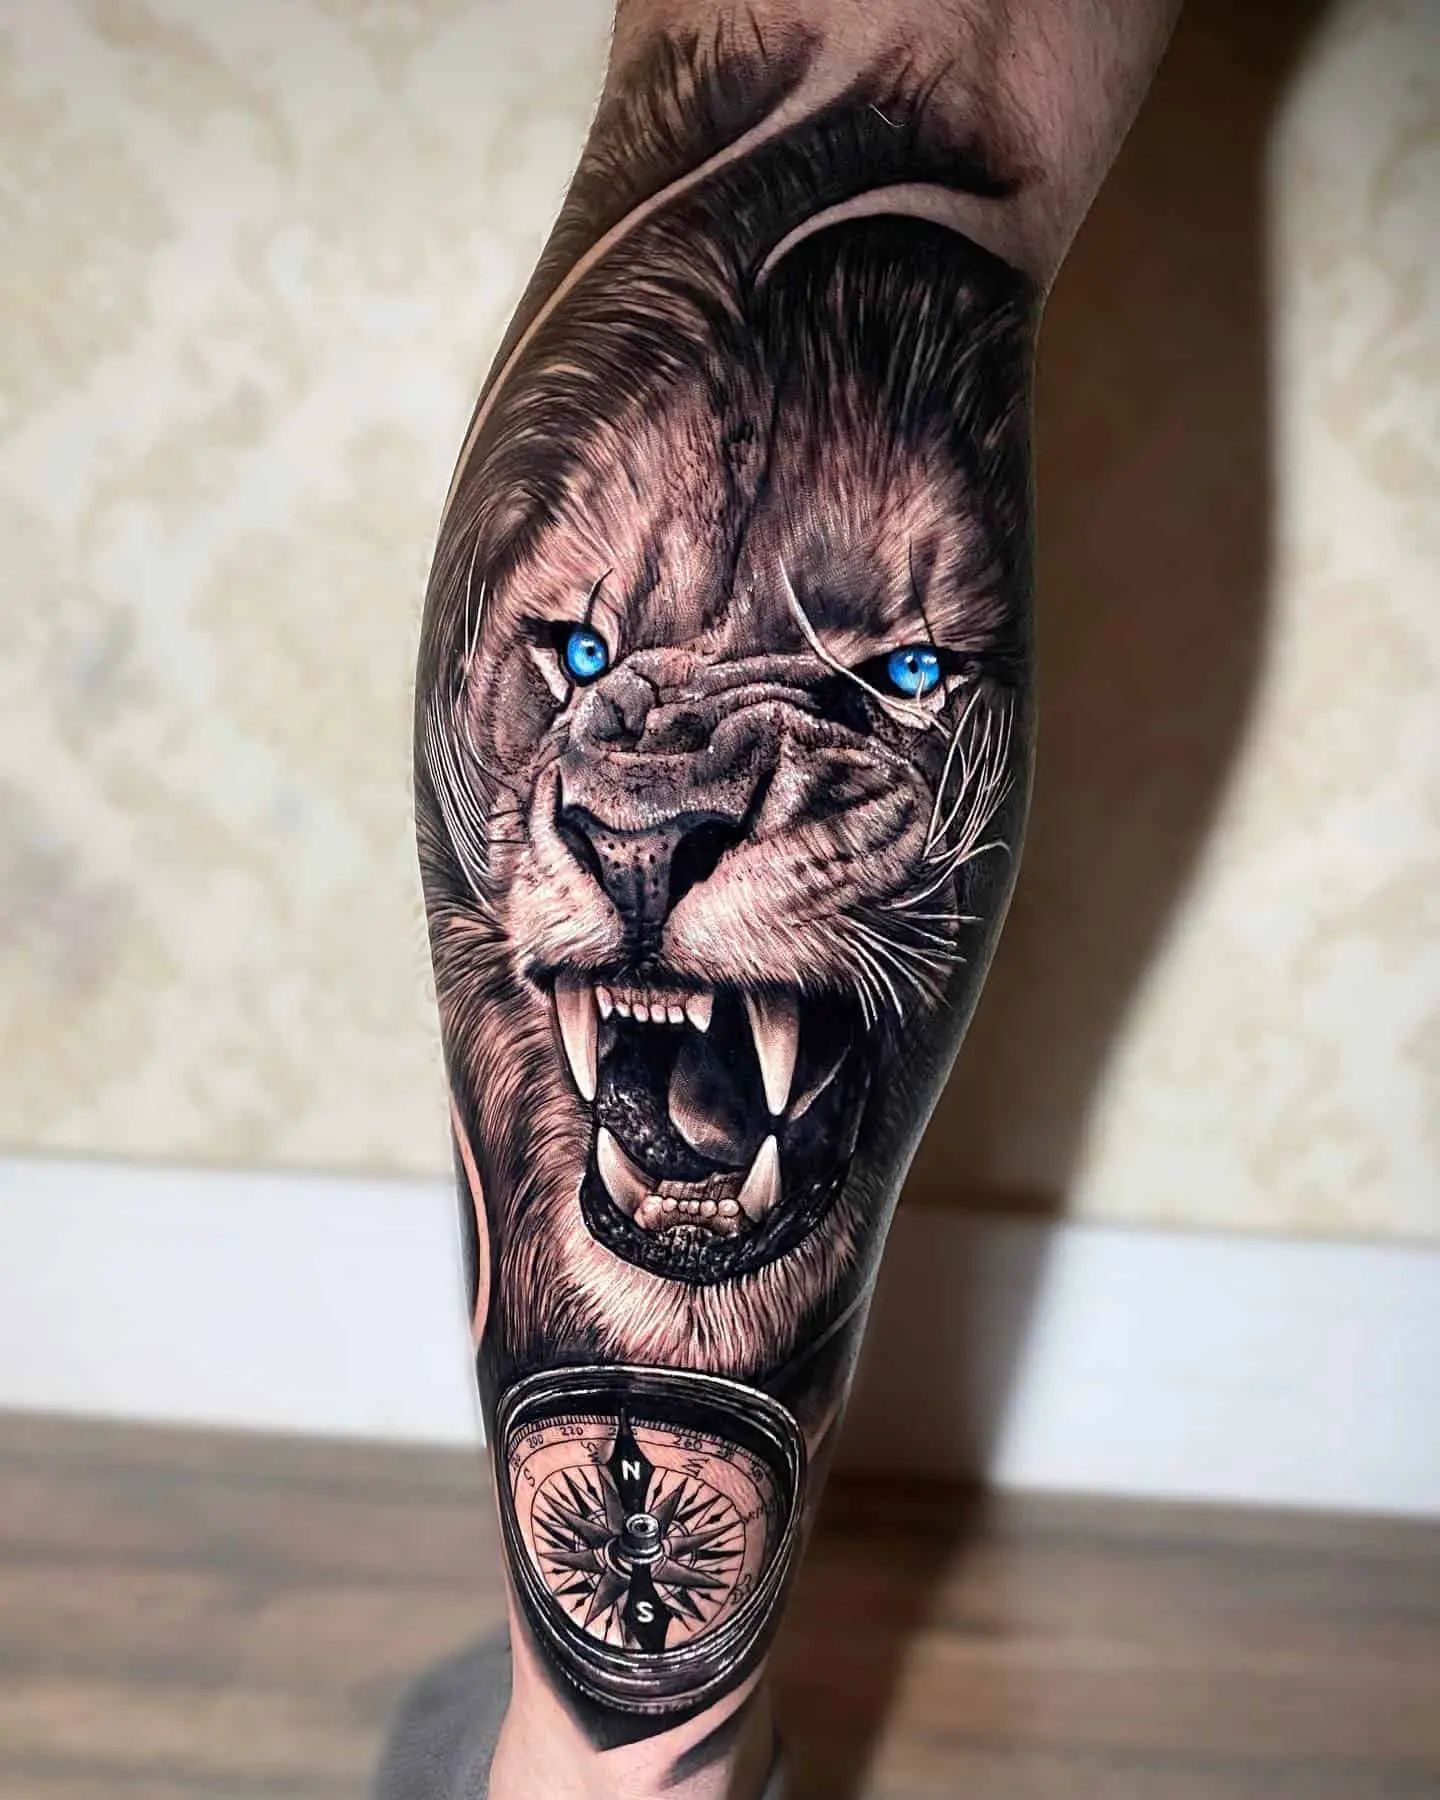 2400 Black Lion Tattoo Stock Photos Pictures  RoyaltyFree Images   iStock